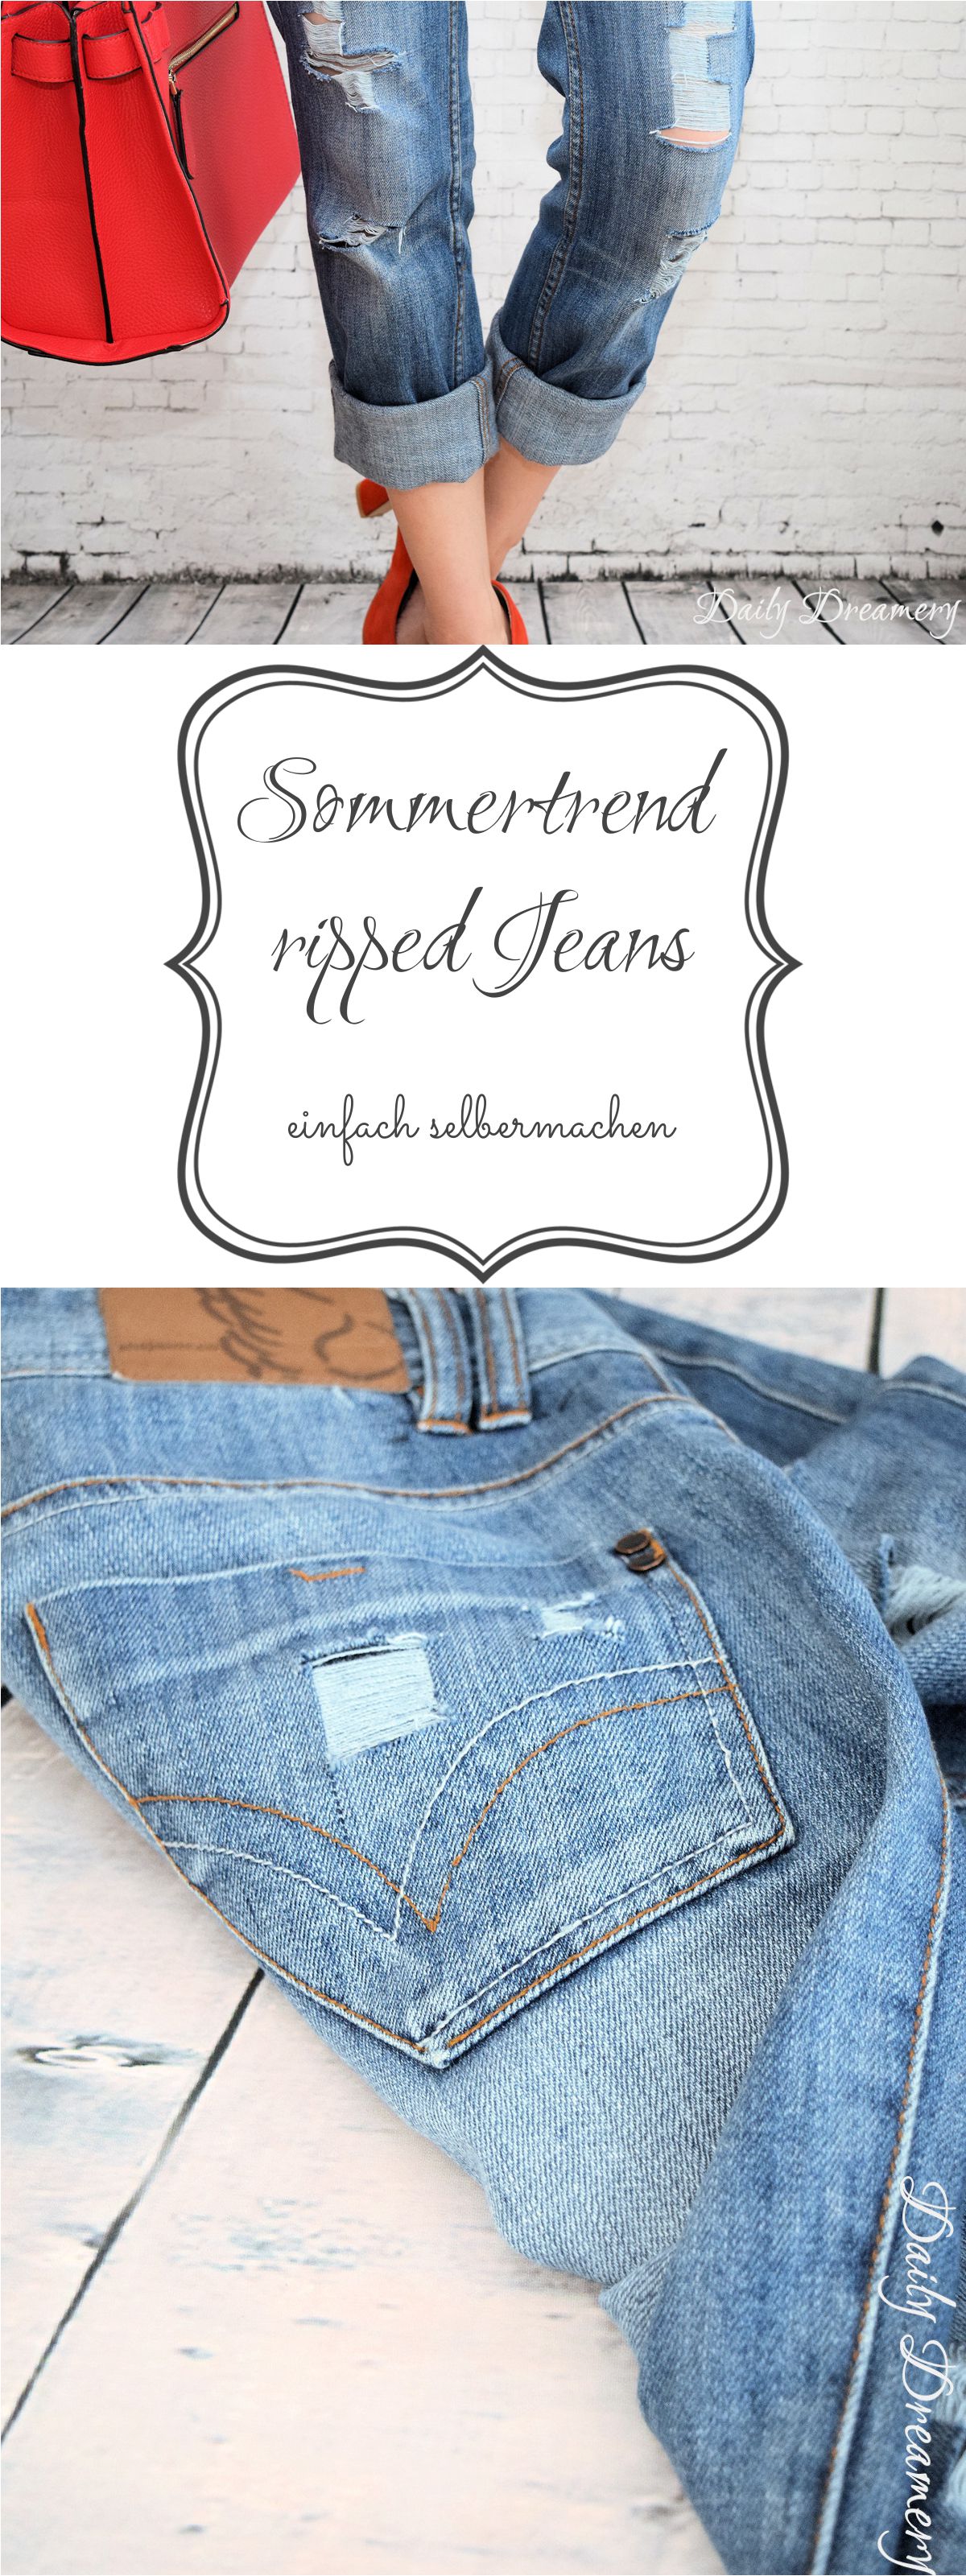 DIY Ripped Jeans Sommertrend